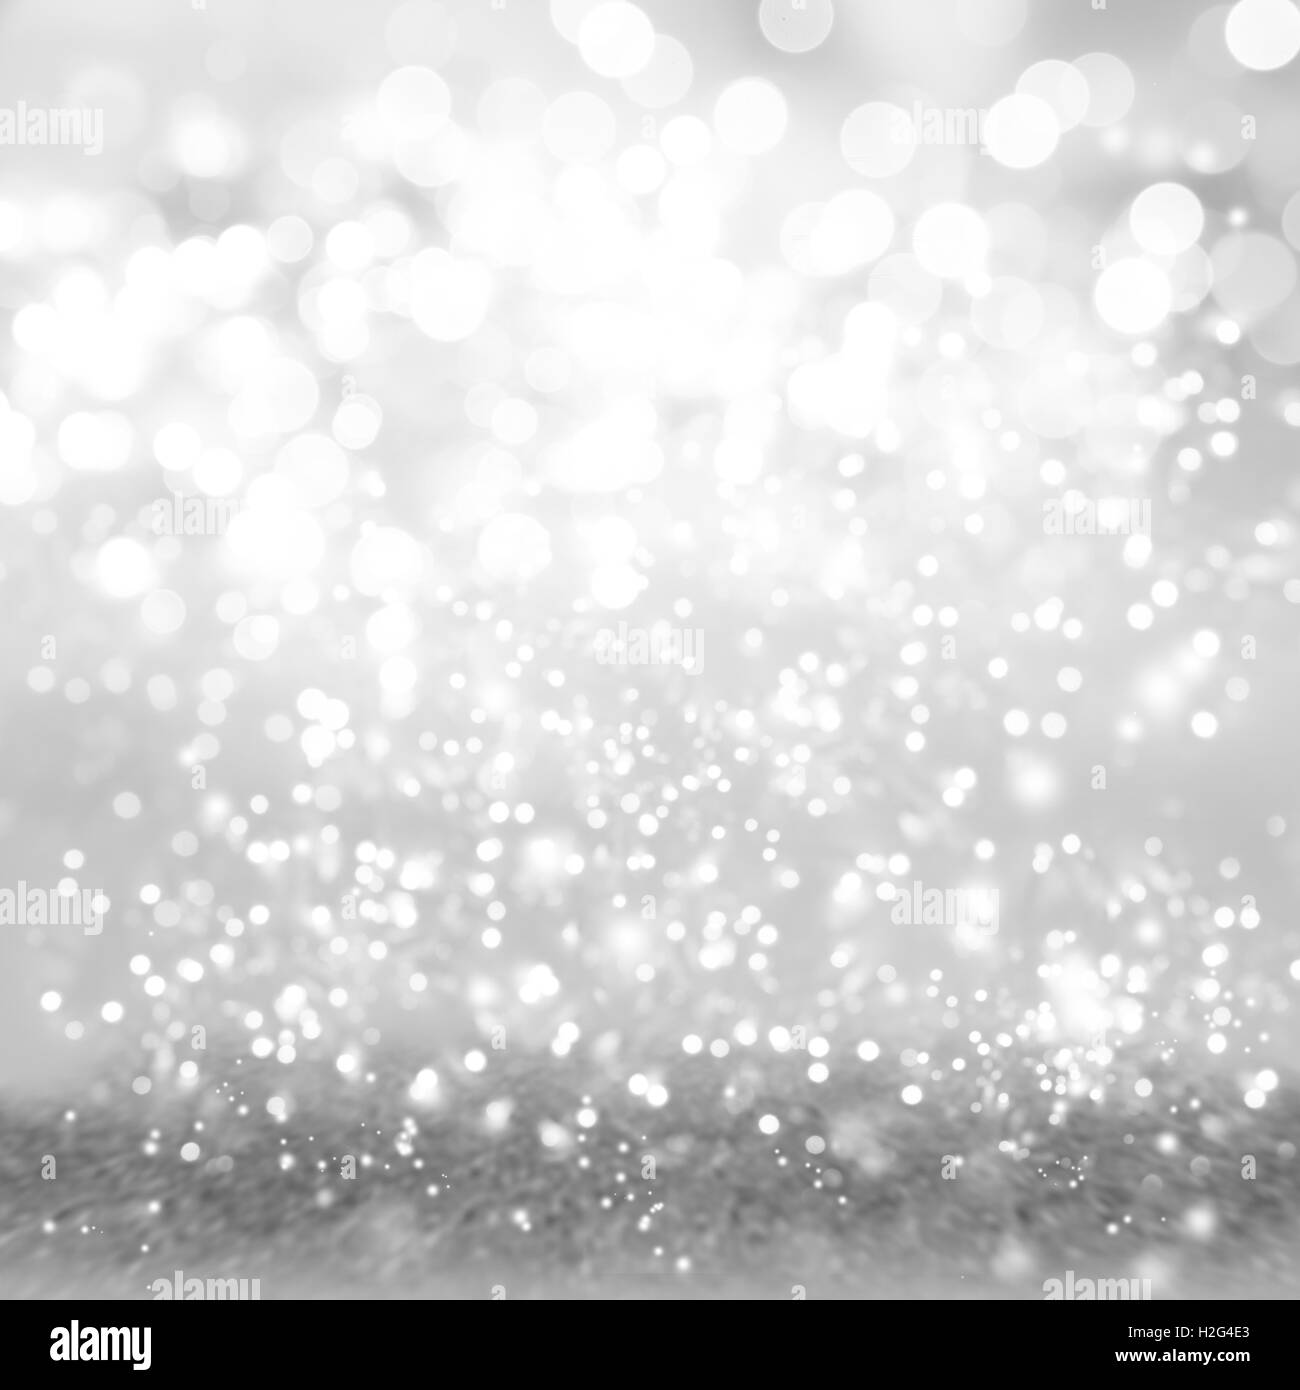 Silver and white circles abstract defocused bokeh background Stock Photo